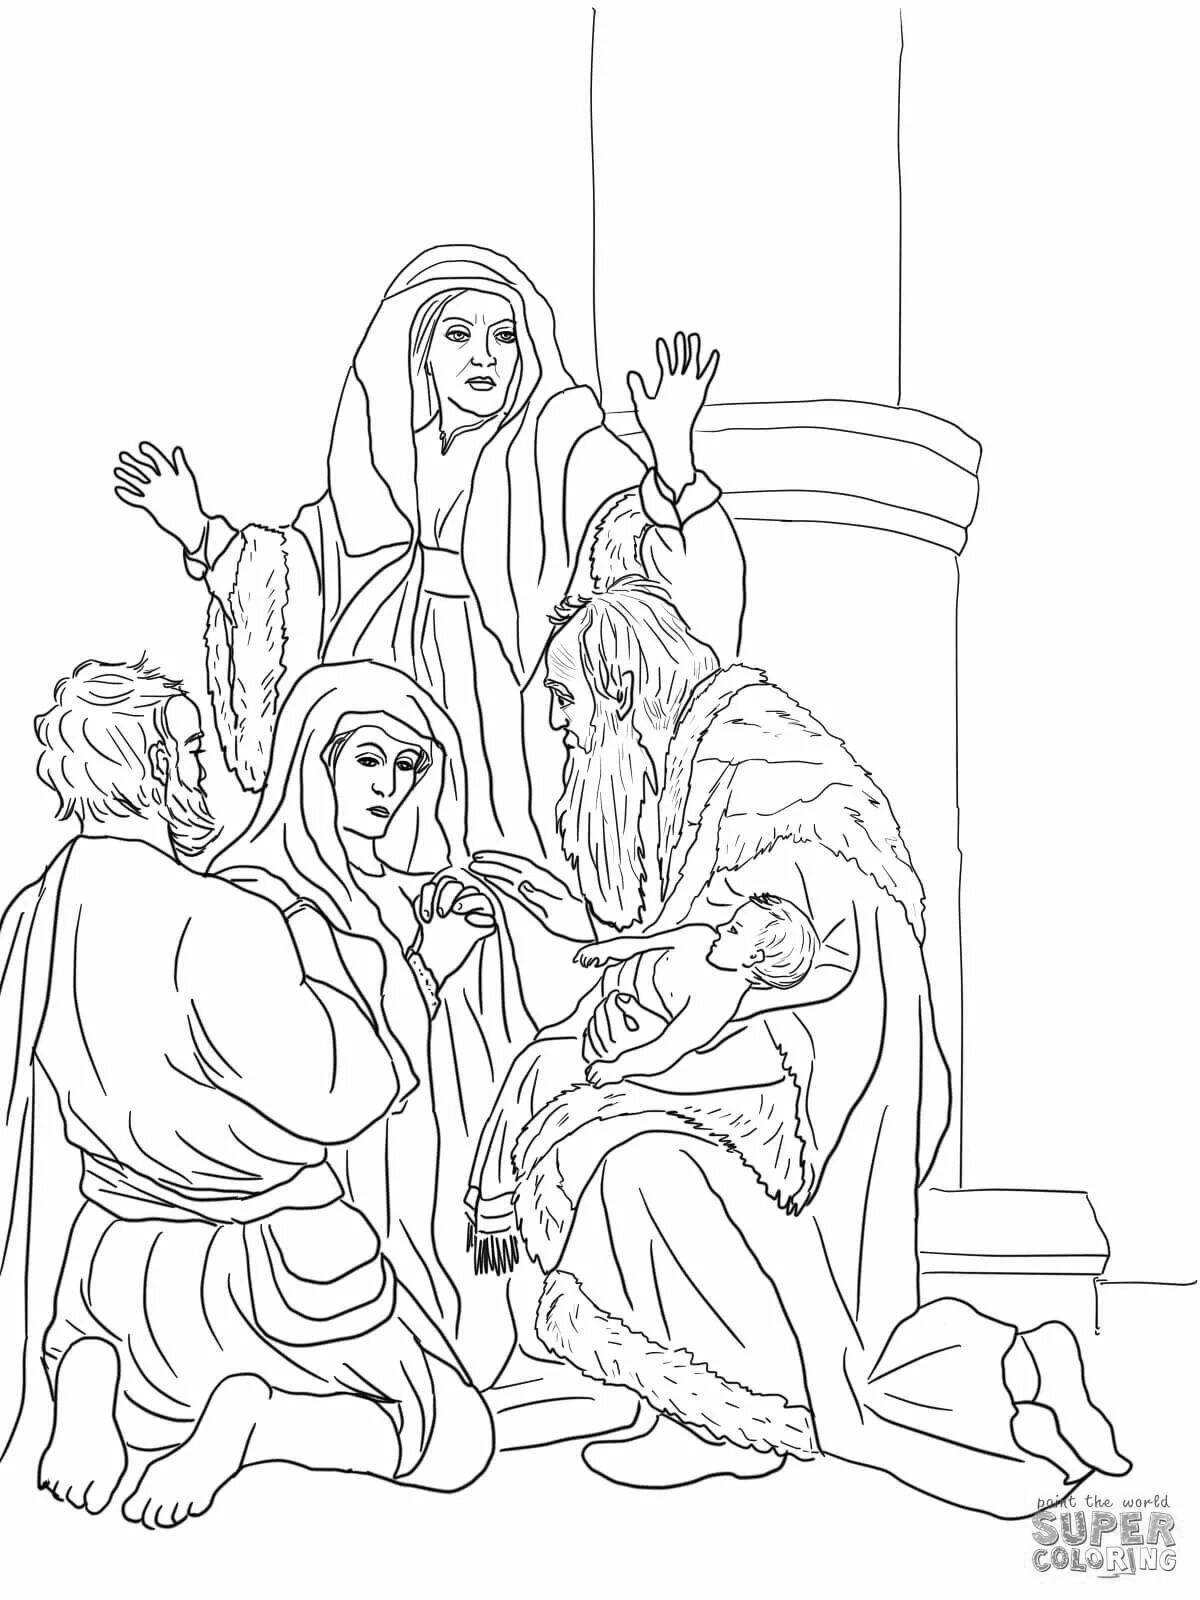 Coloring page divine meeting of the Lord